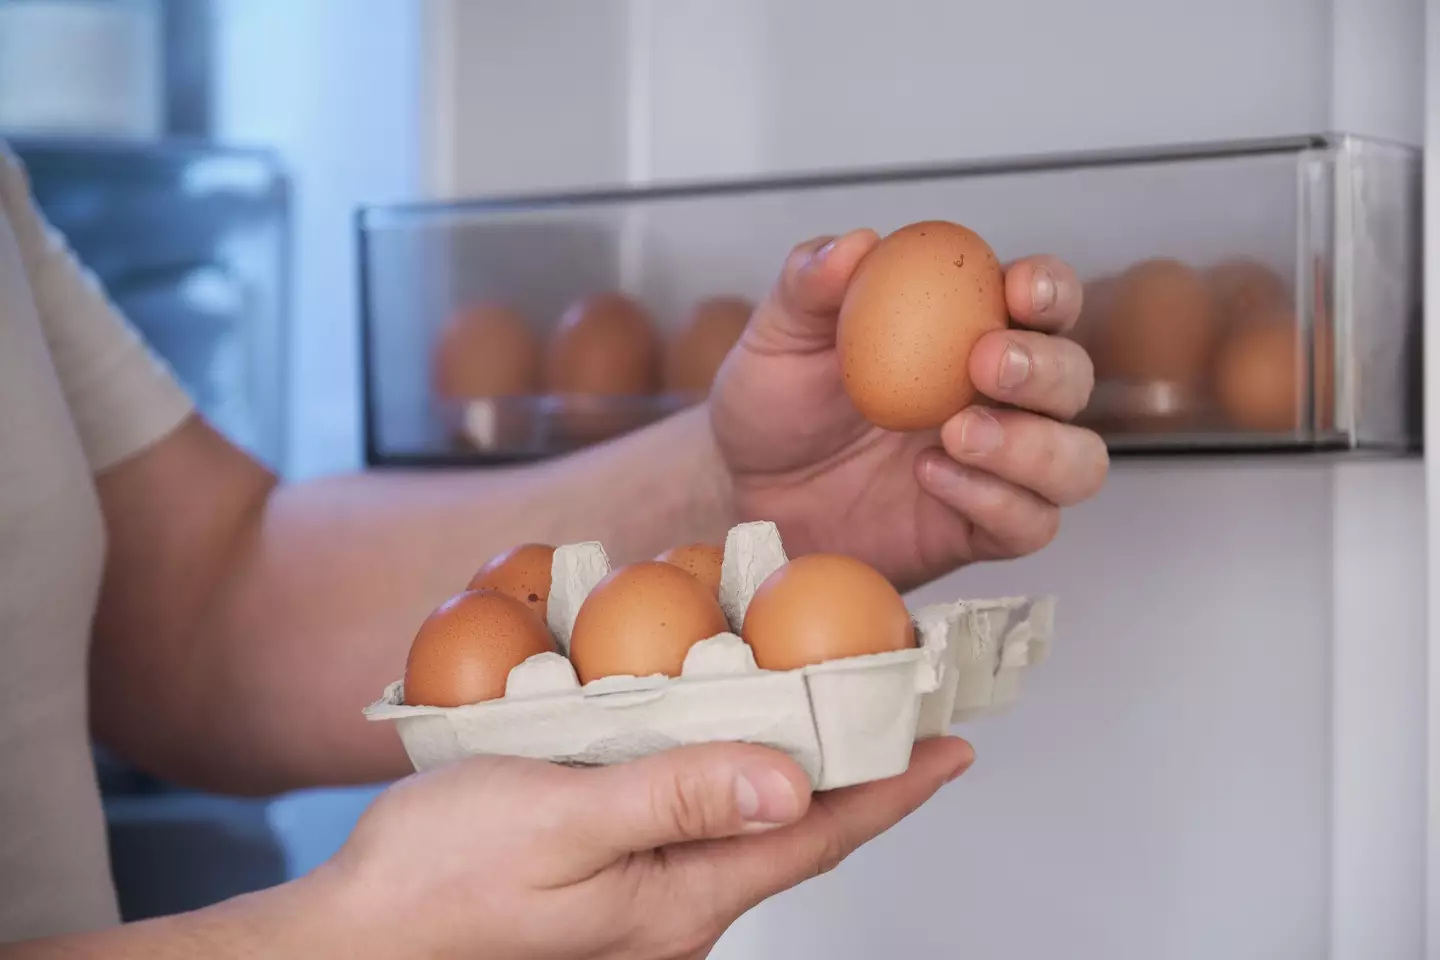 Martin recommends not storing eggs in the fridge.